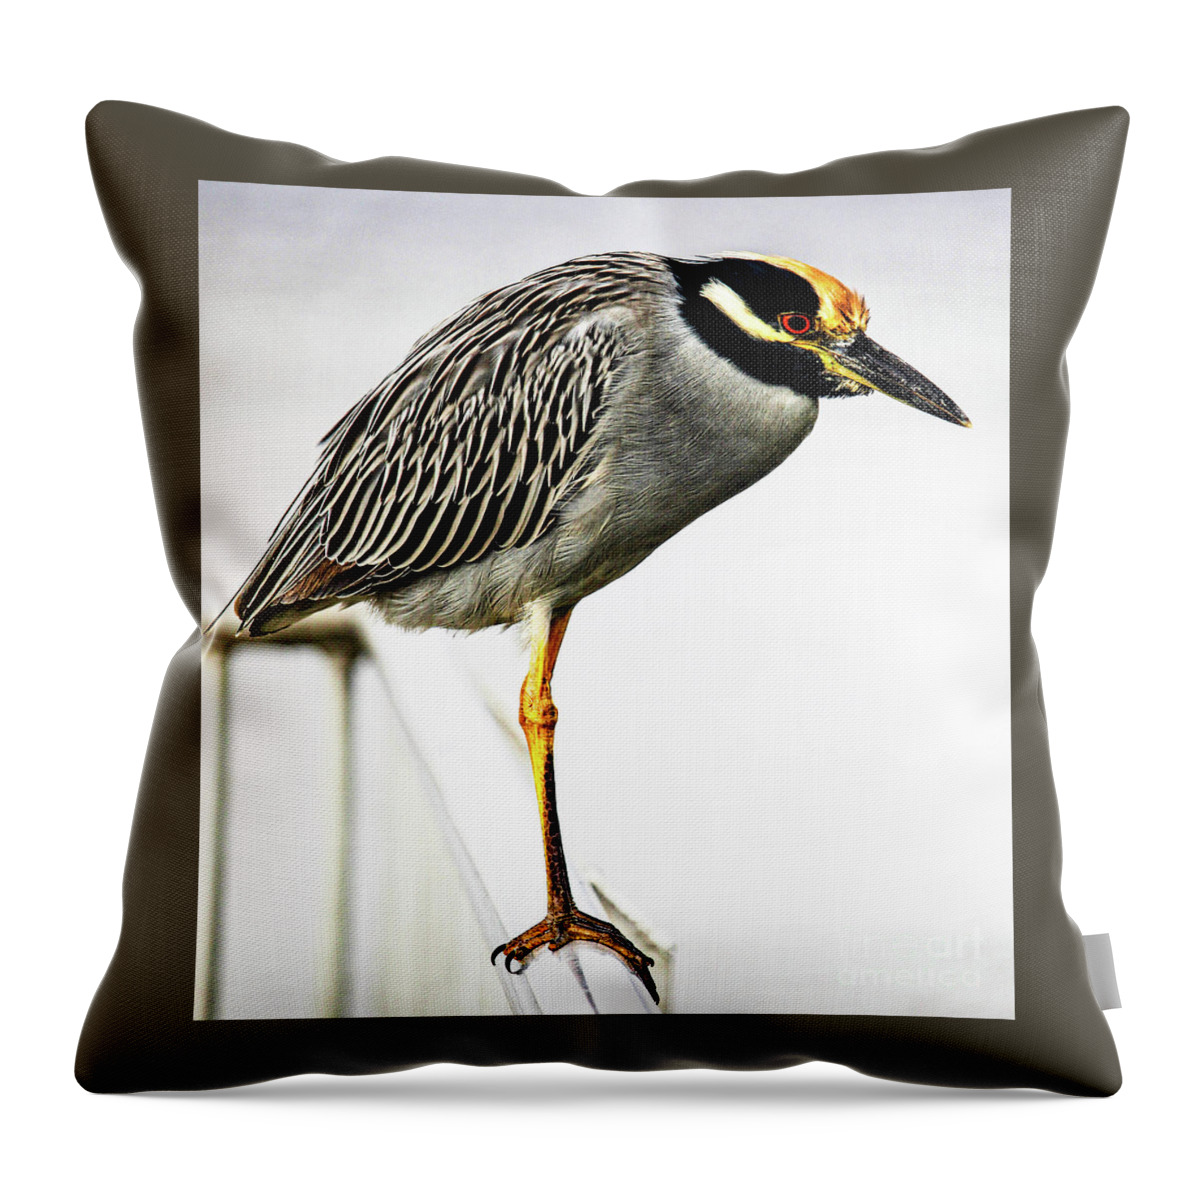 Heron Throw Pillow featuring the photograph Yellow Crowned Night Heron by Joanne Carey